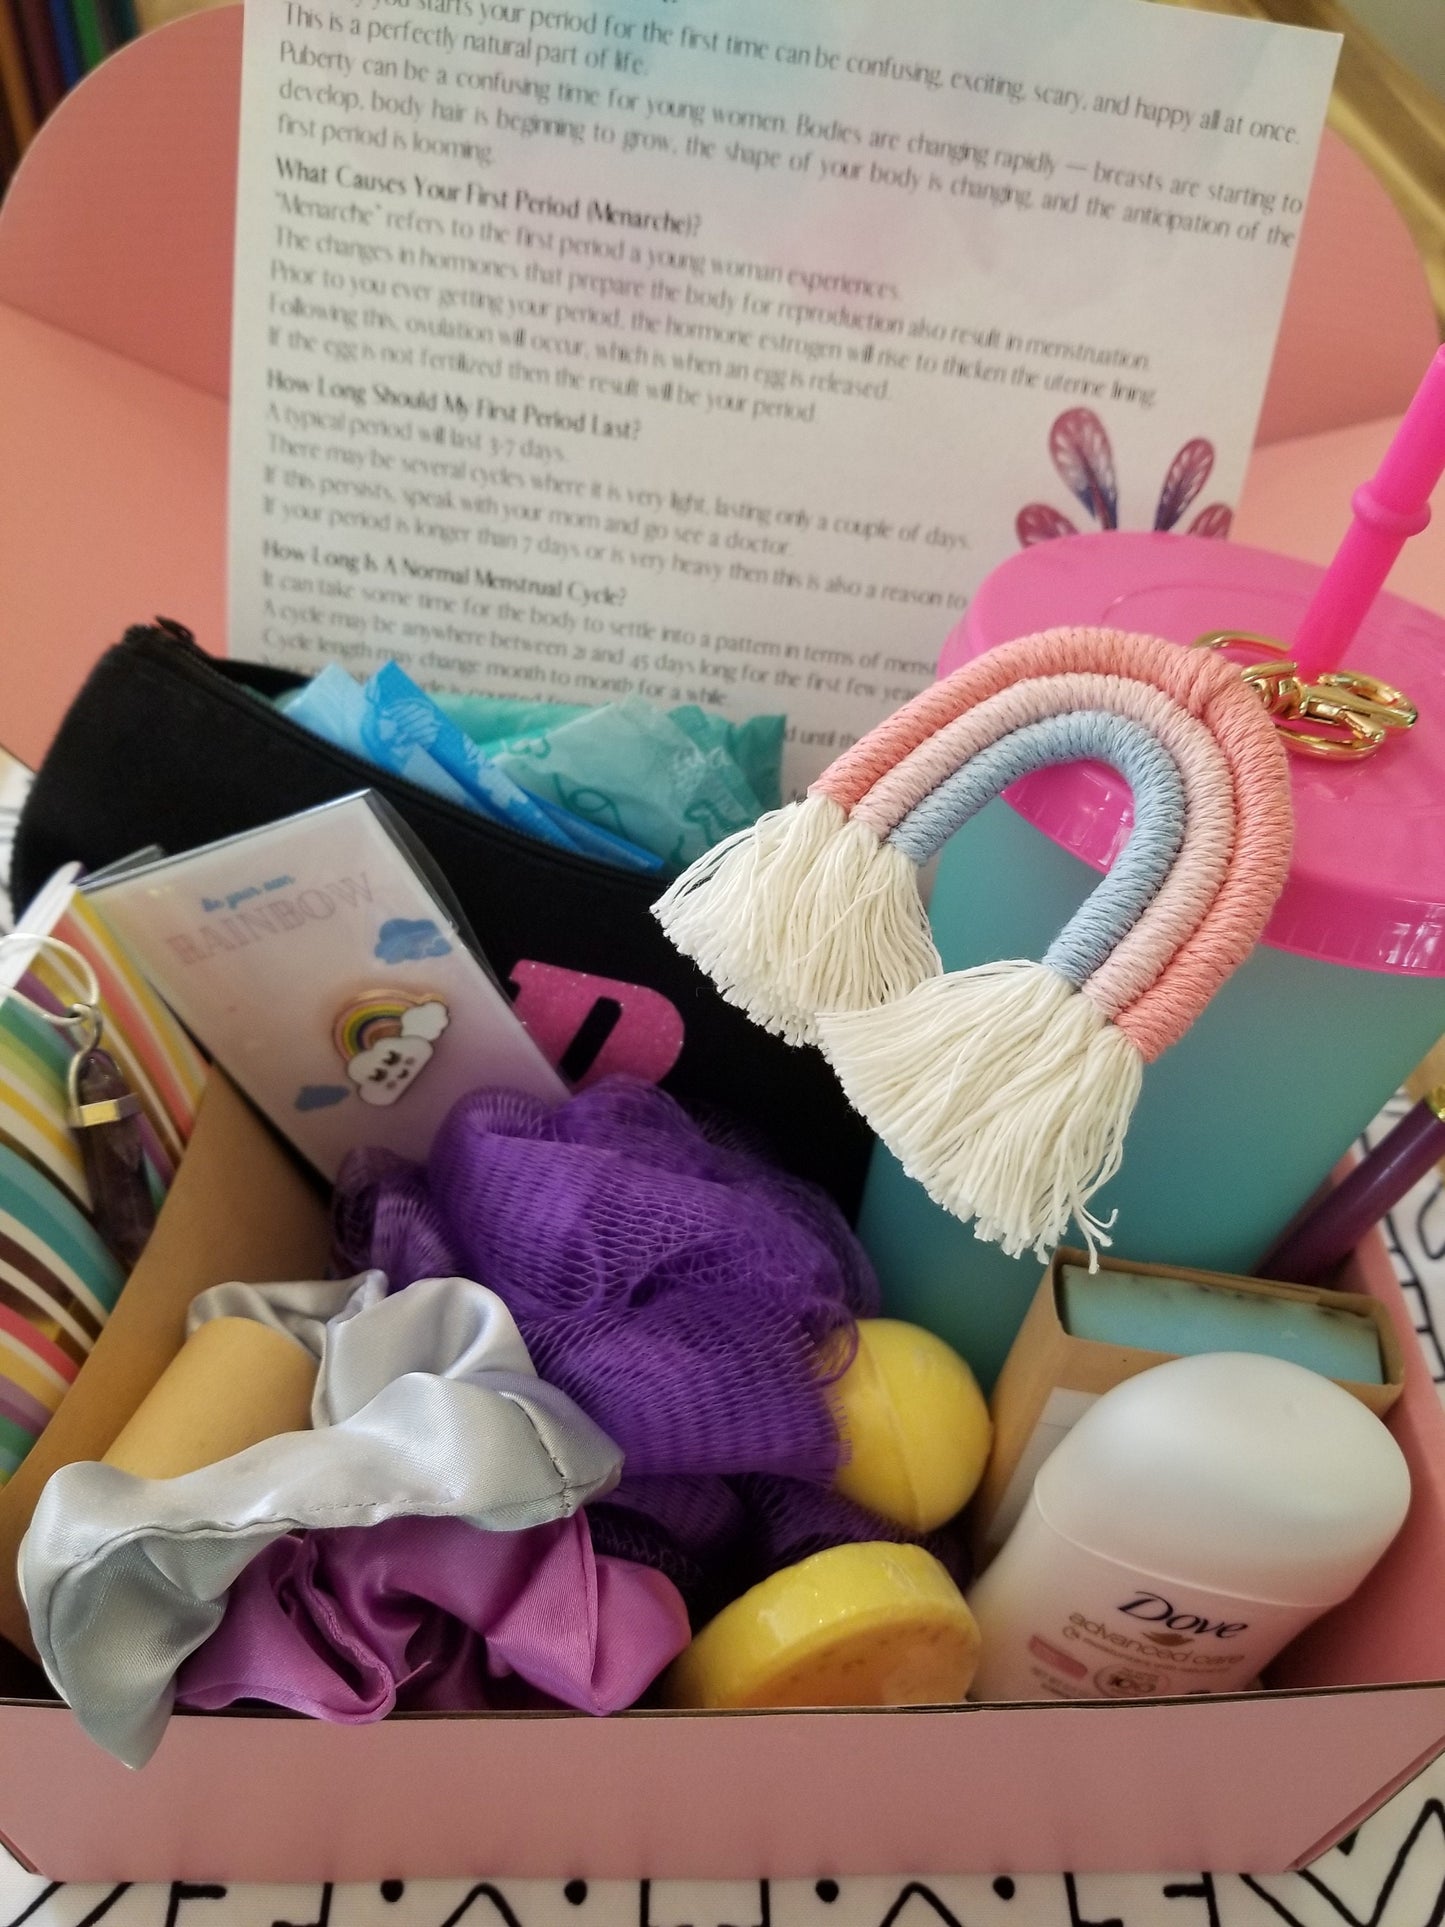 First period gift set, Care package for teen and tween girl